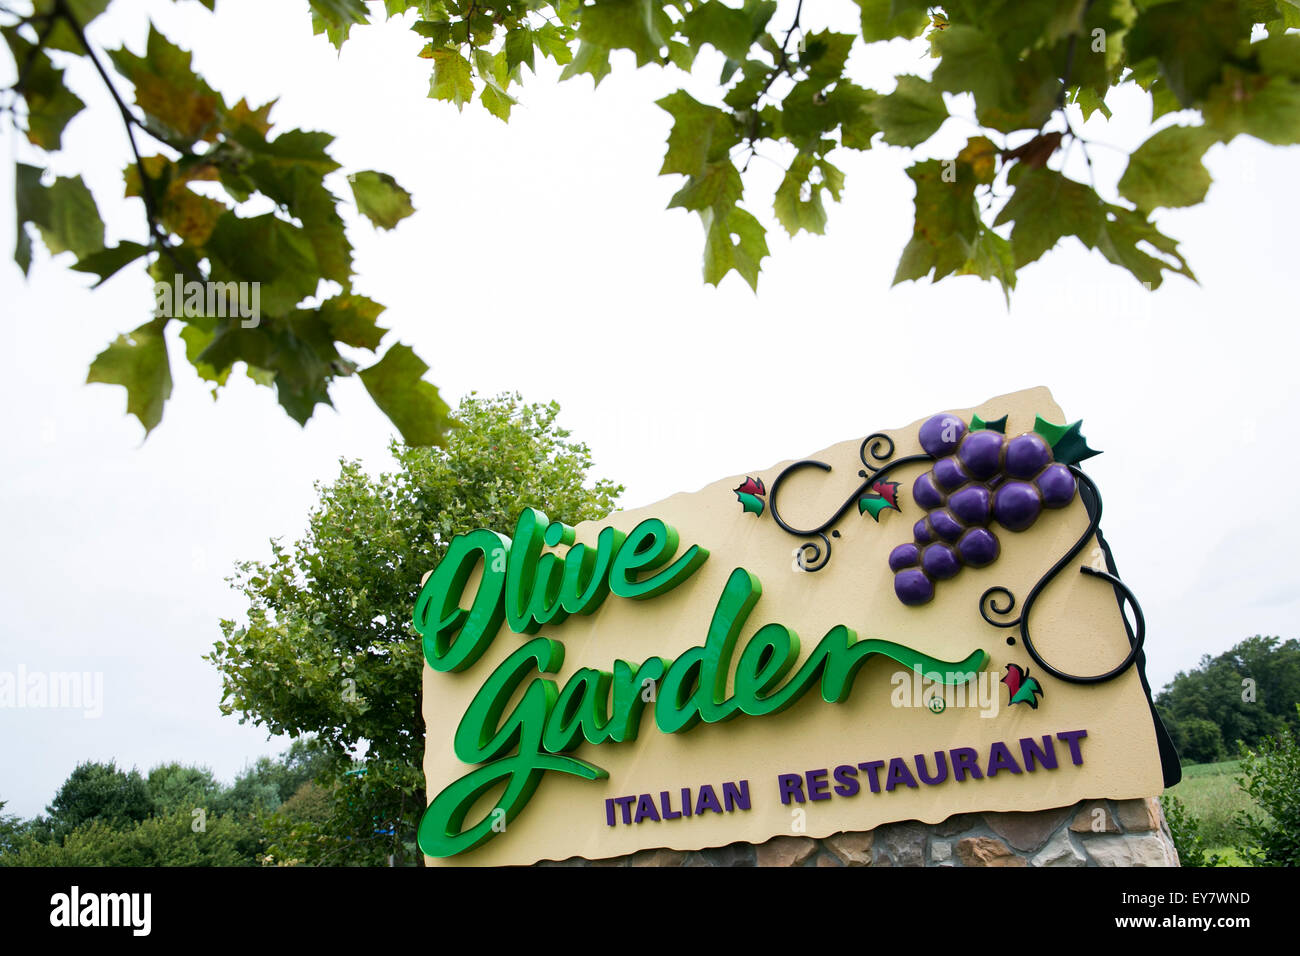 A logo sign outside of an Olive Garden restaurant location in Easton, Maryland on July 18, 2015. Stock Photo